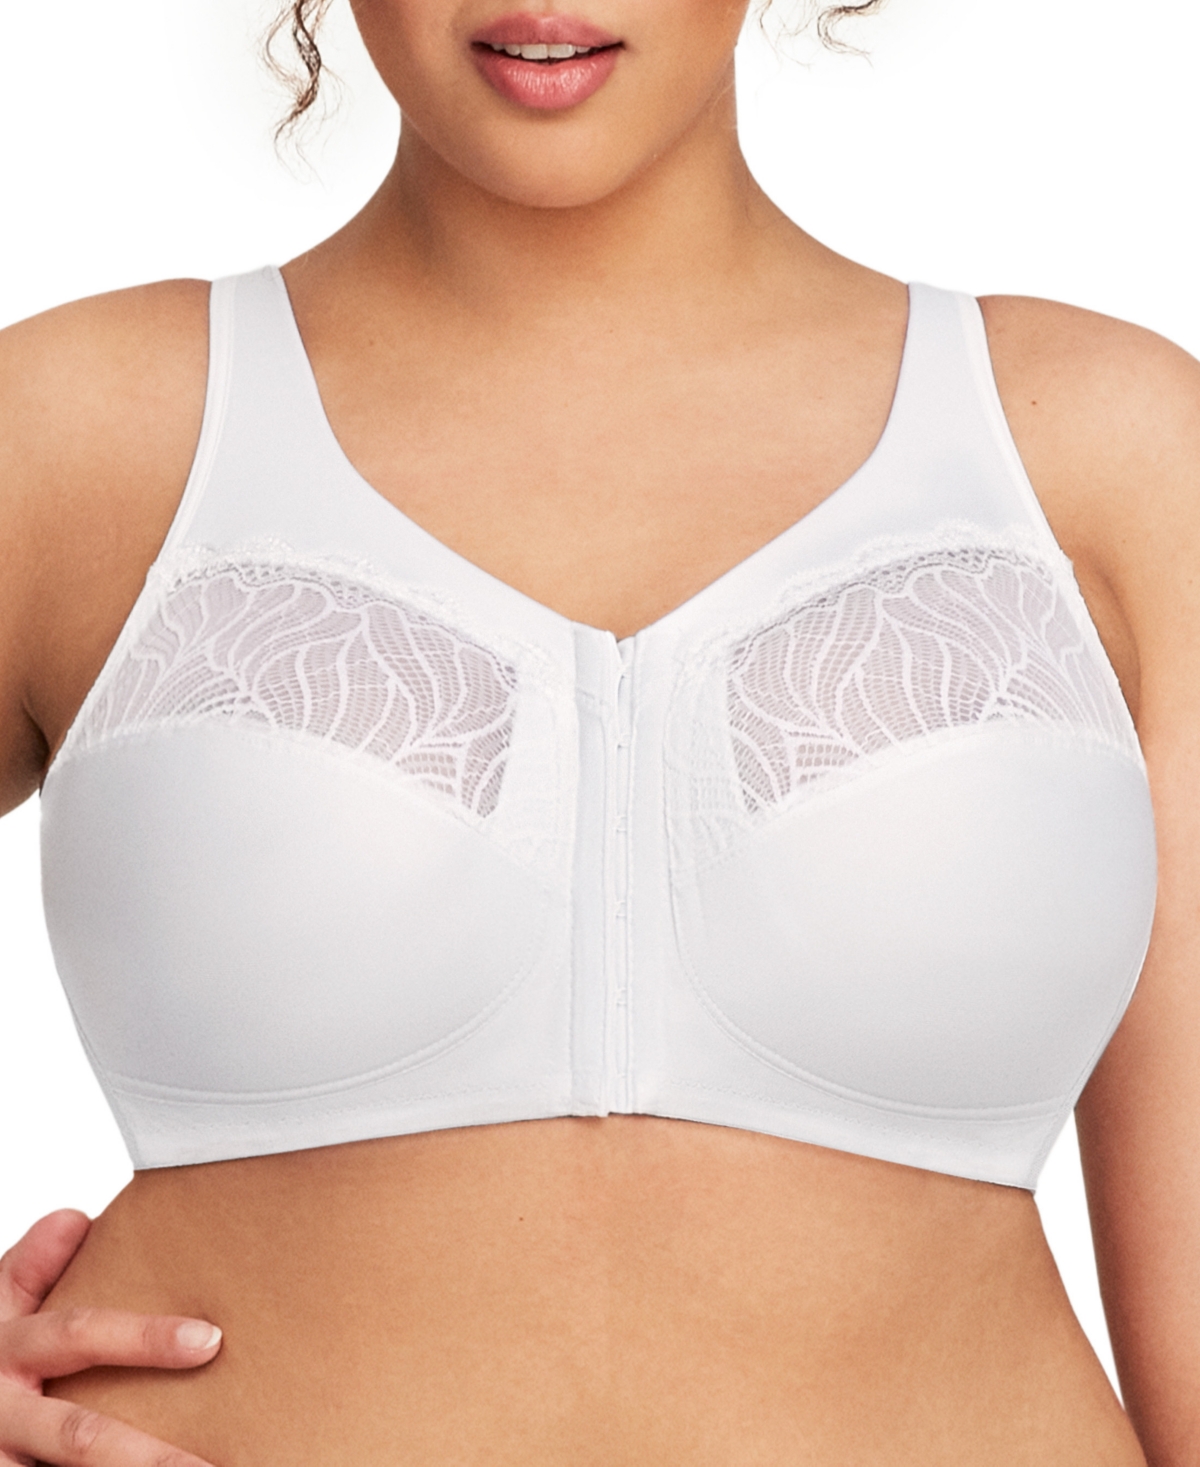 Plus Size Full Figure Magiclift Natural Shape Front Closure Wirefree Bra - White